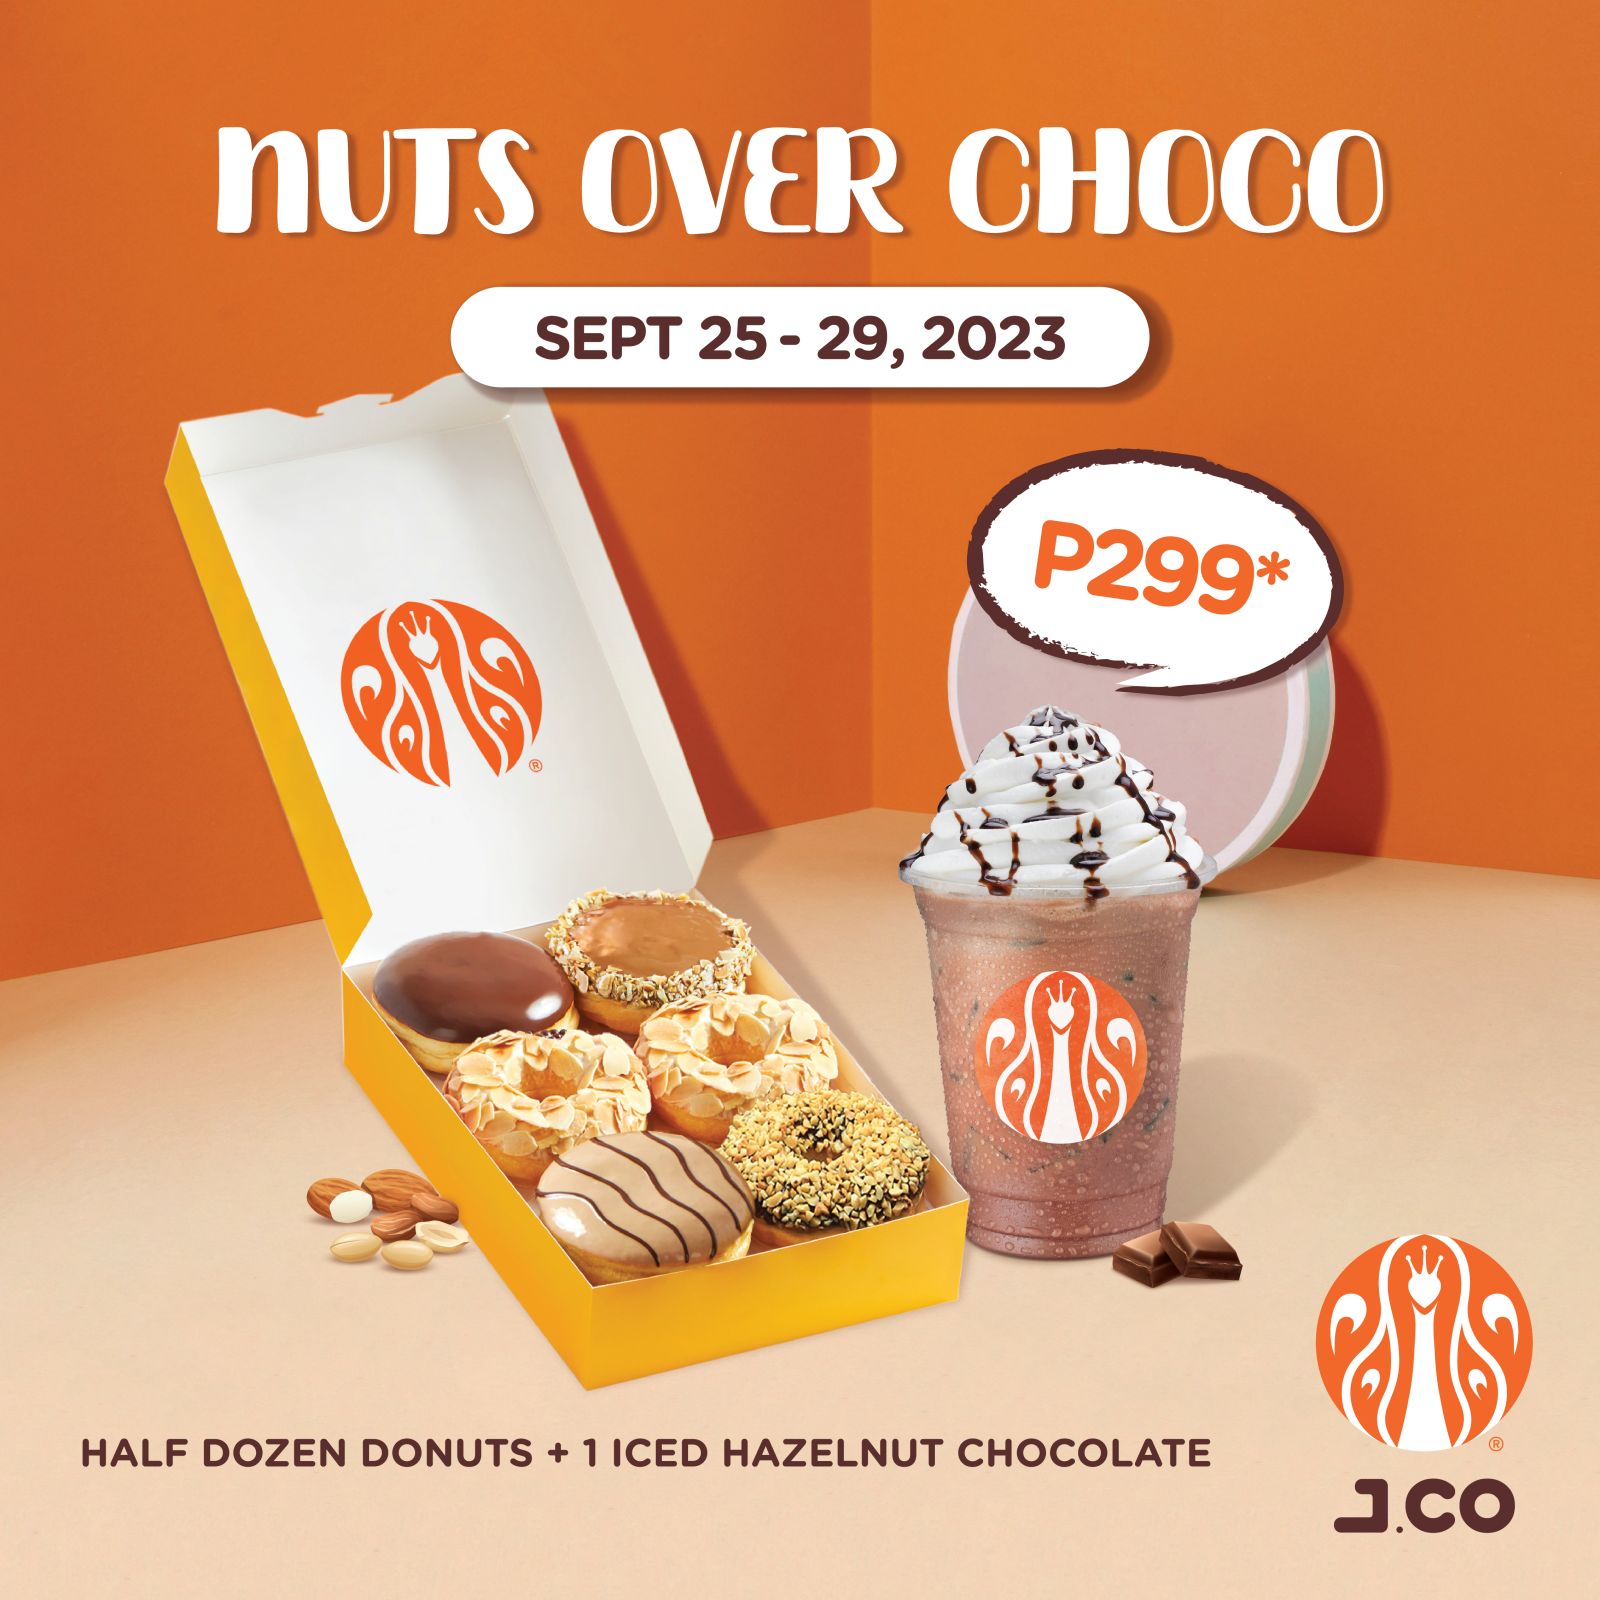 J.CO Donuts' Nuts Over Choco Promo